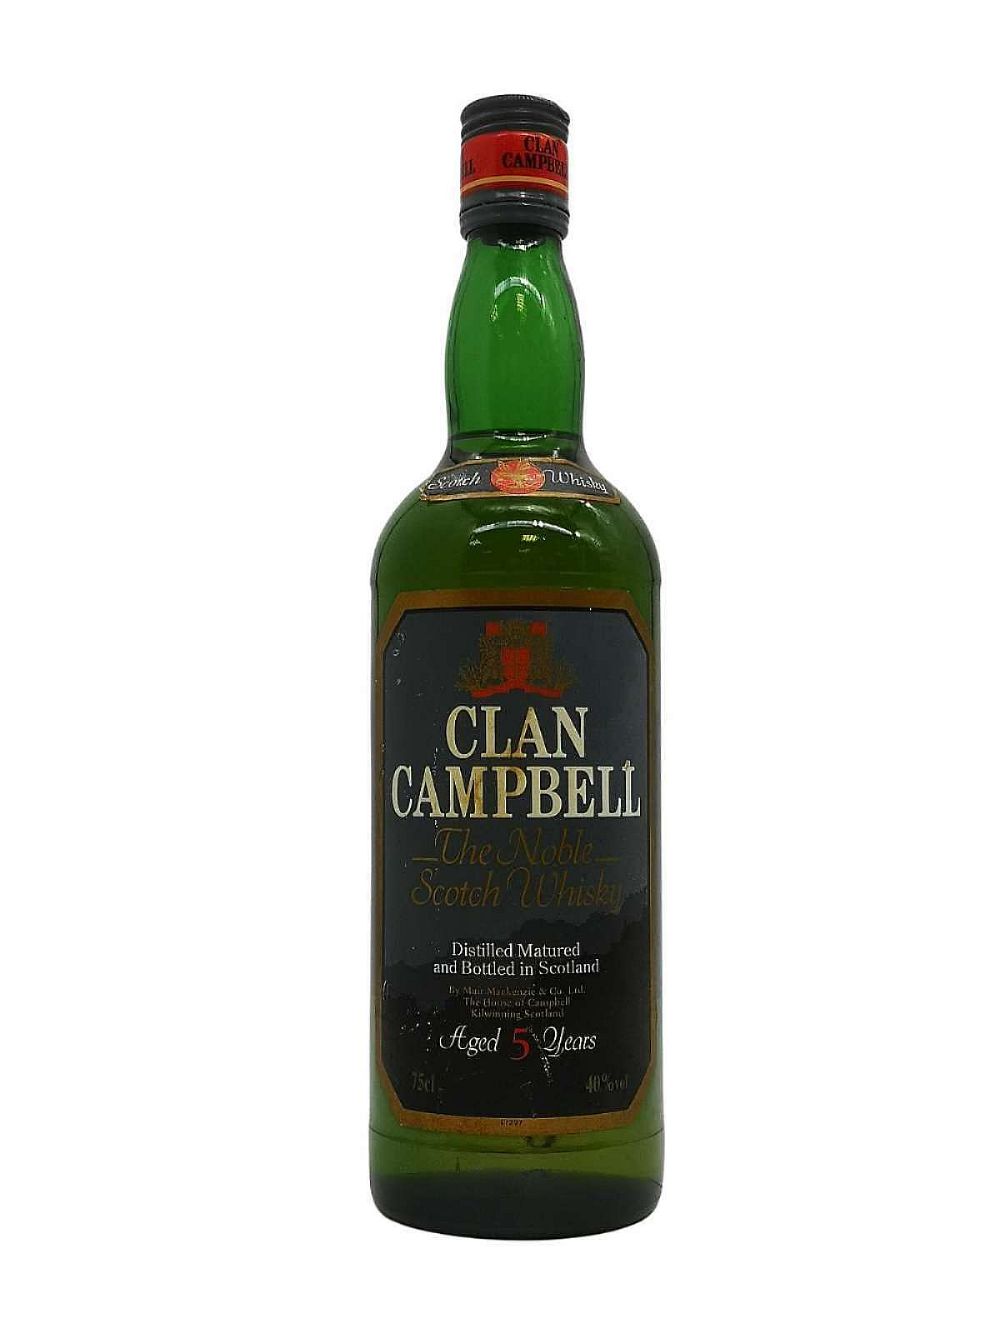 Clan Campbell - 5 Year Old (75cl) Whisky Auction, Whisky Hammer® Whisky  Auctioneer